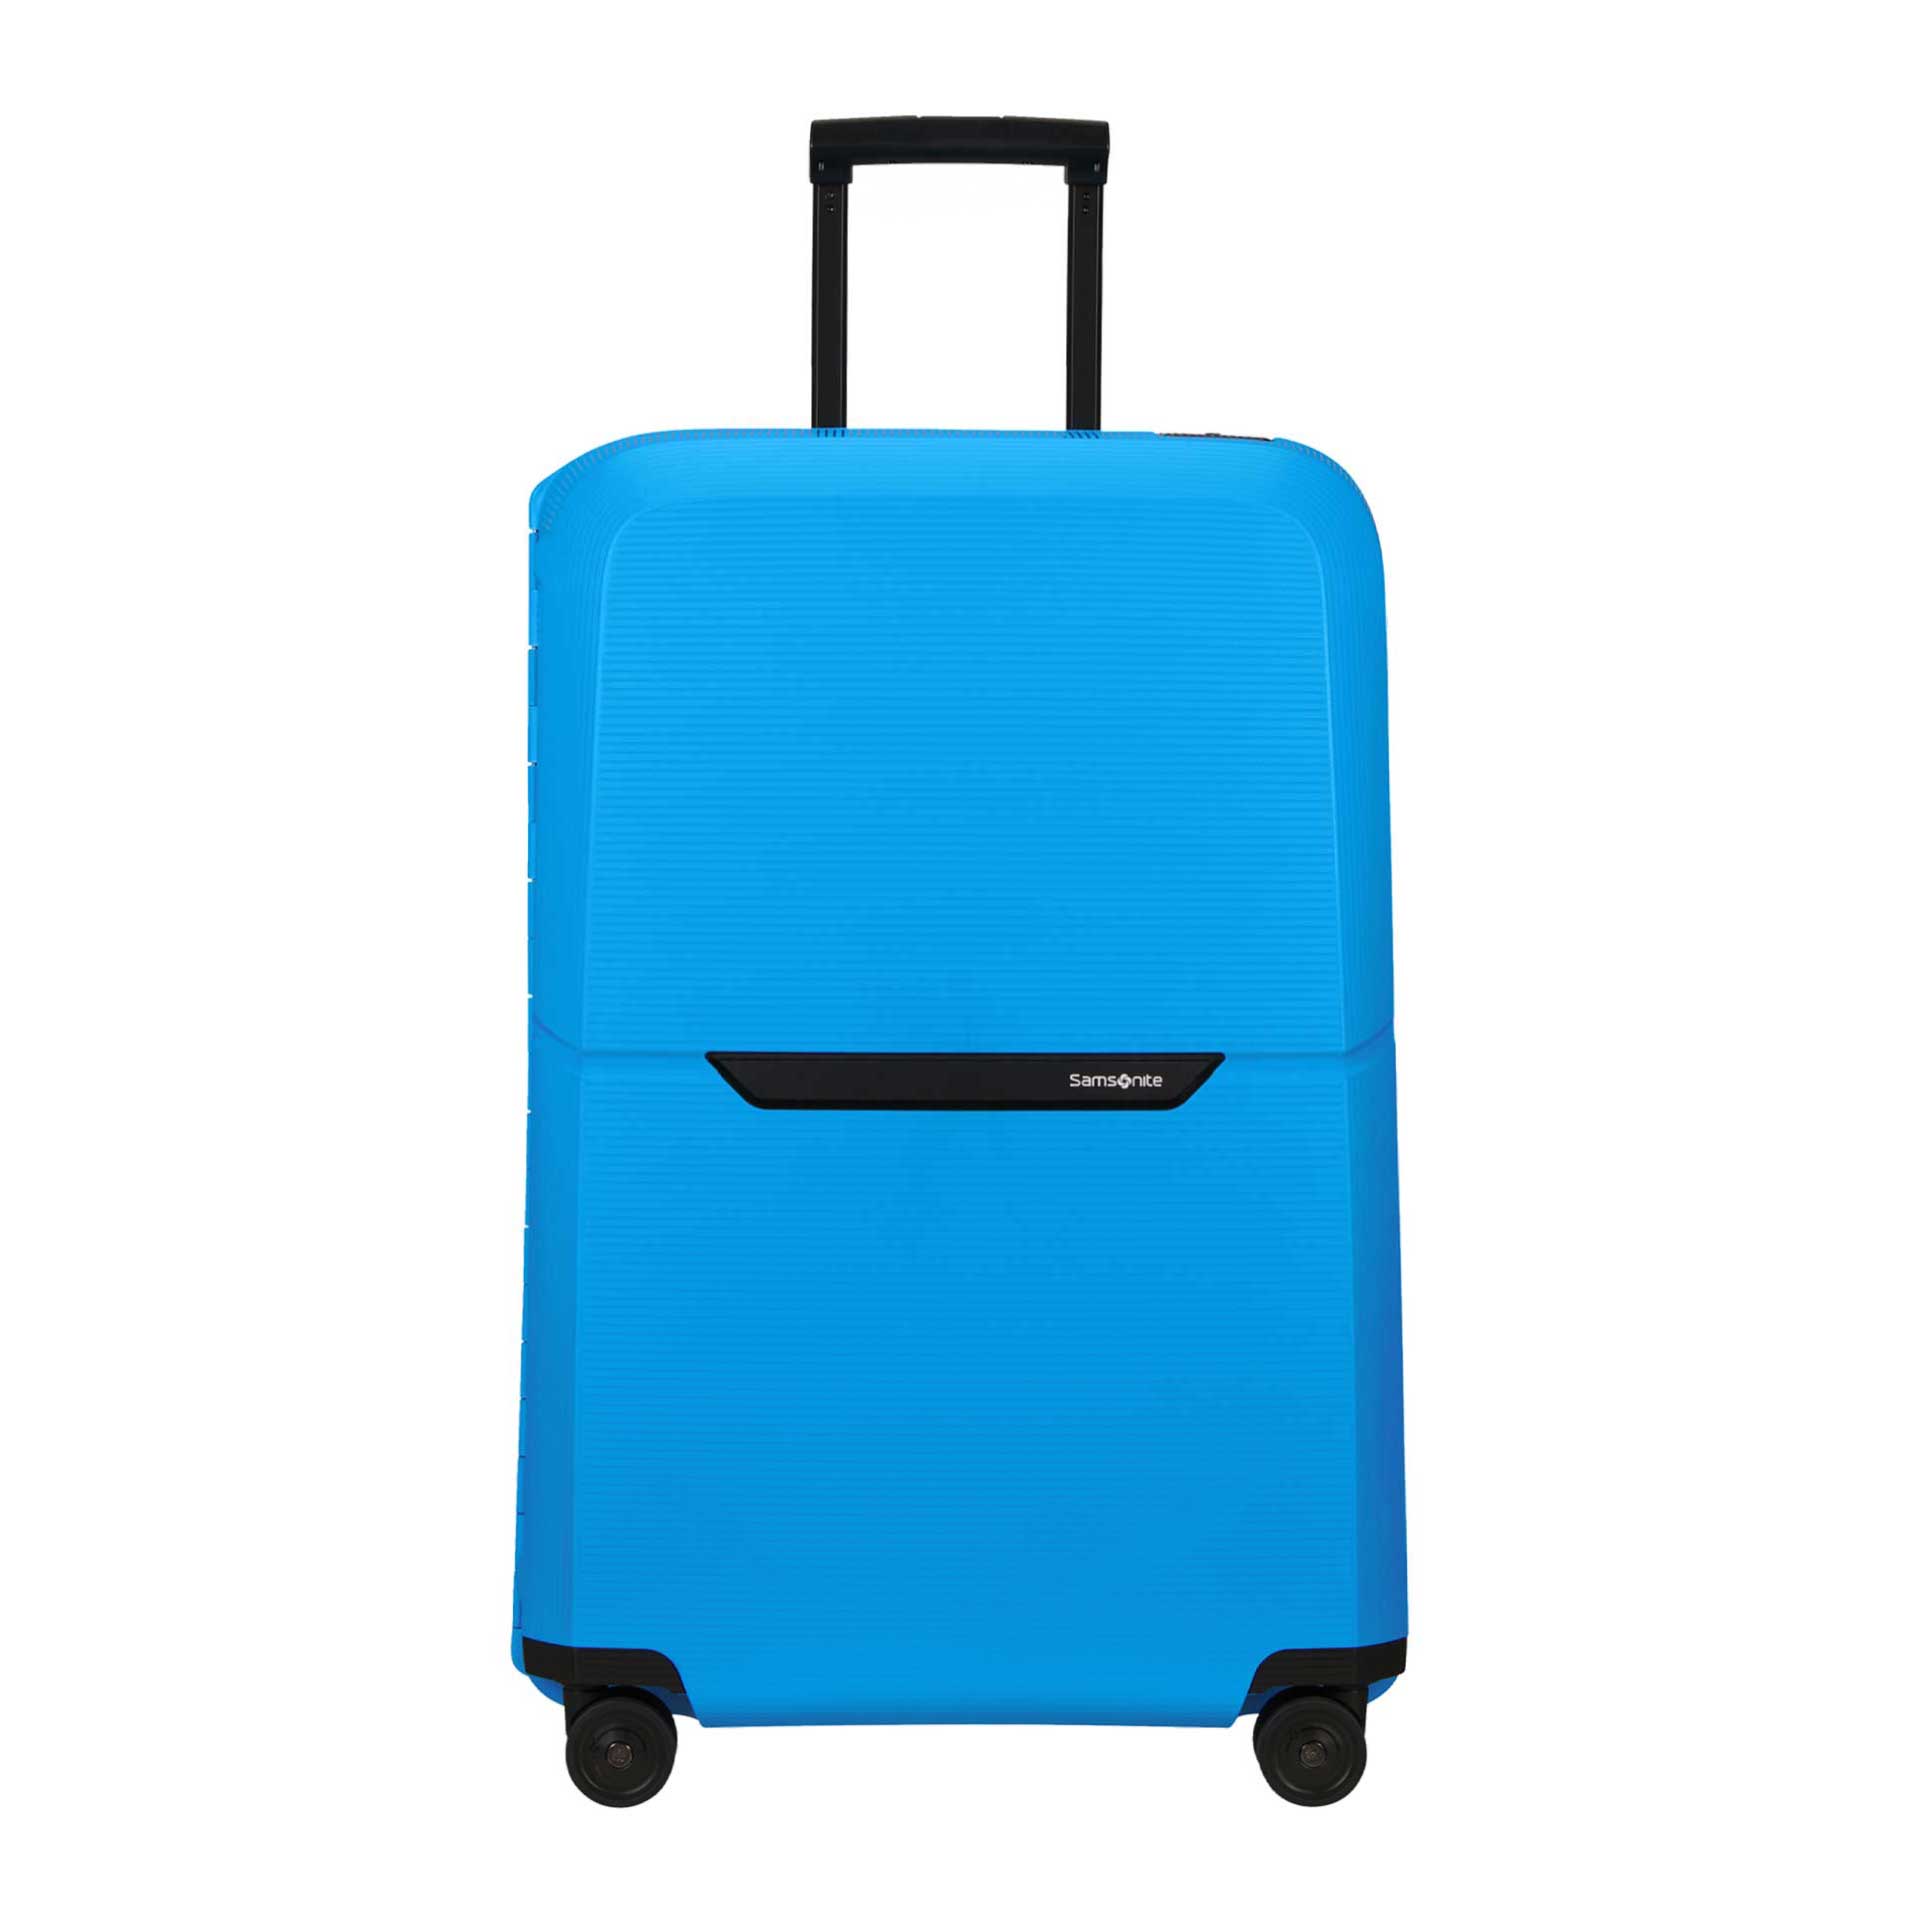 Samsonite Selection Magnum Eco cm blue | Material 4 summer blue 75 Rollen summer Trolley | 139847-4497-summerblue mit Recycling aus